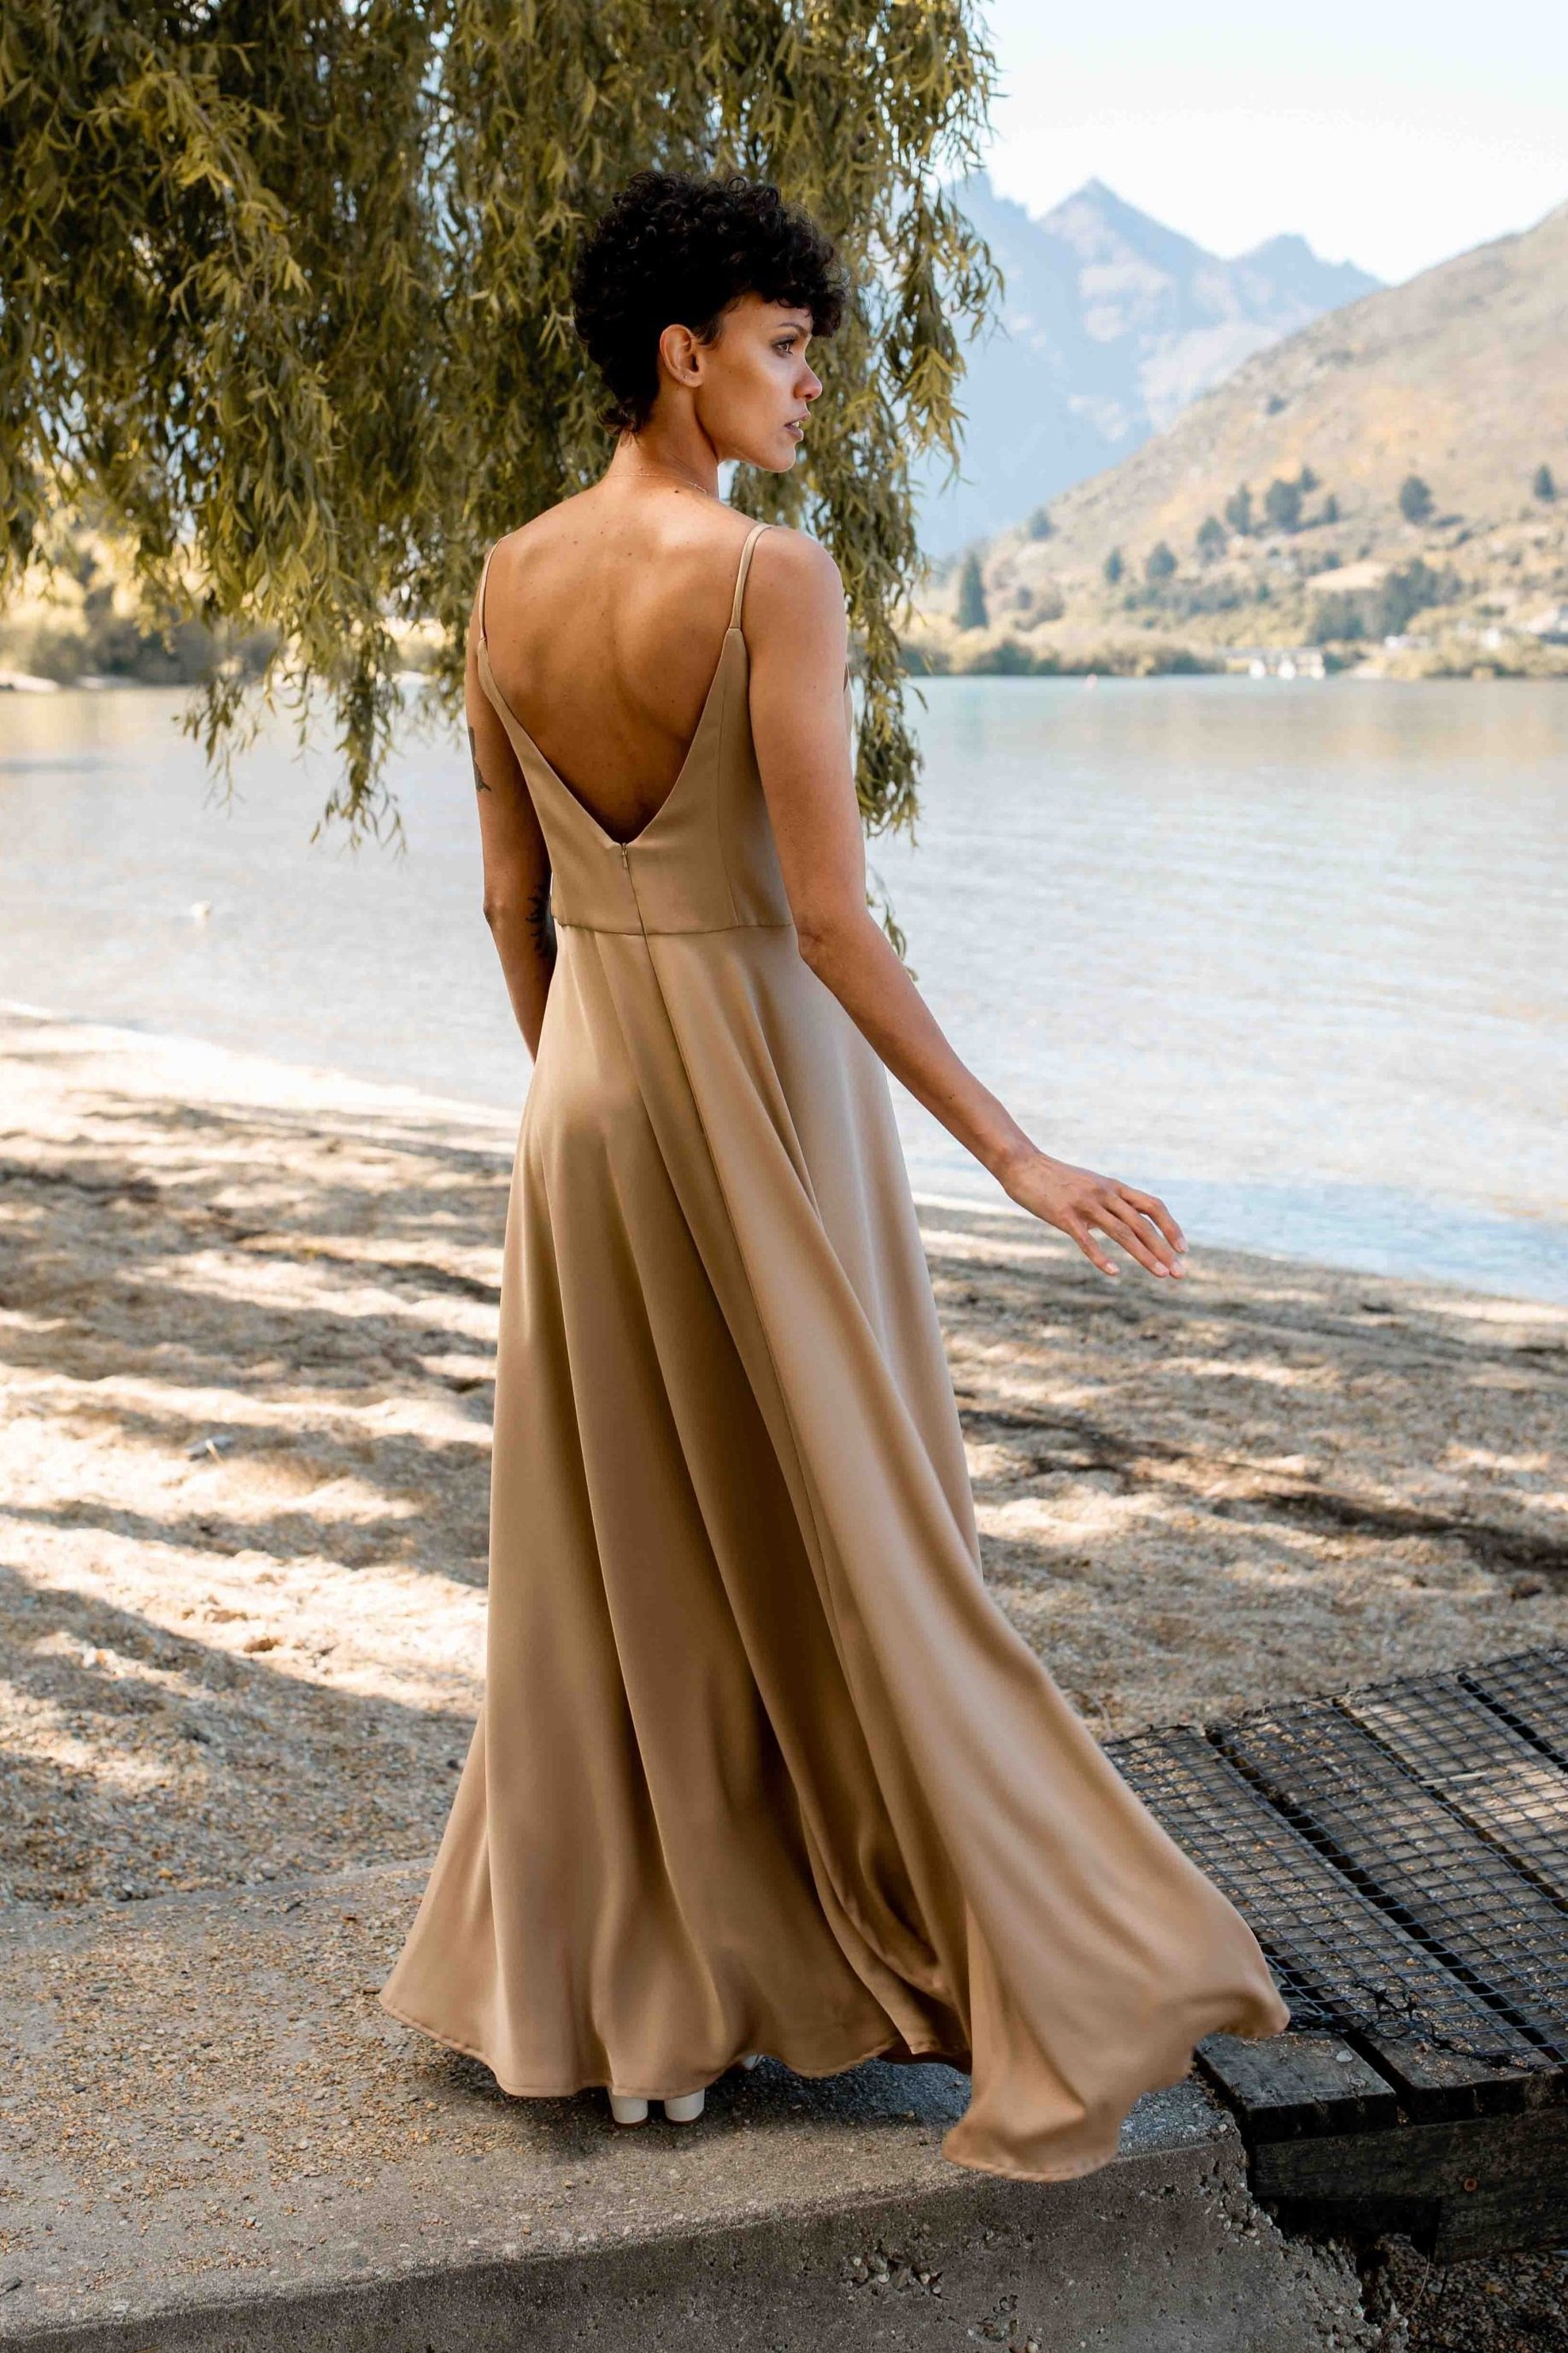 Xena+Dress+in+Armani+Nude+-+Nemo+Bridal+Couture+Queenstown+New+Zealand+0V9A2597.jpg